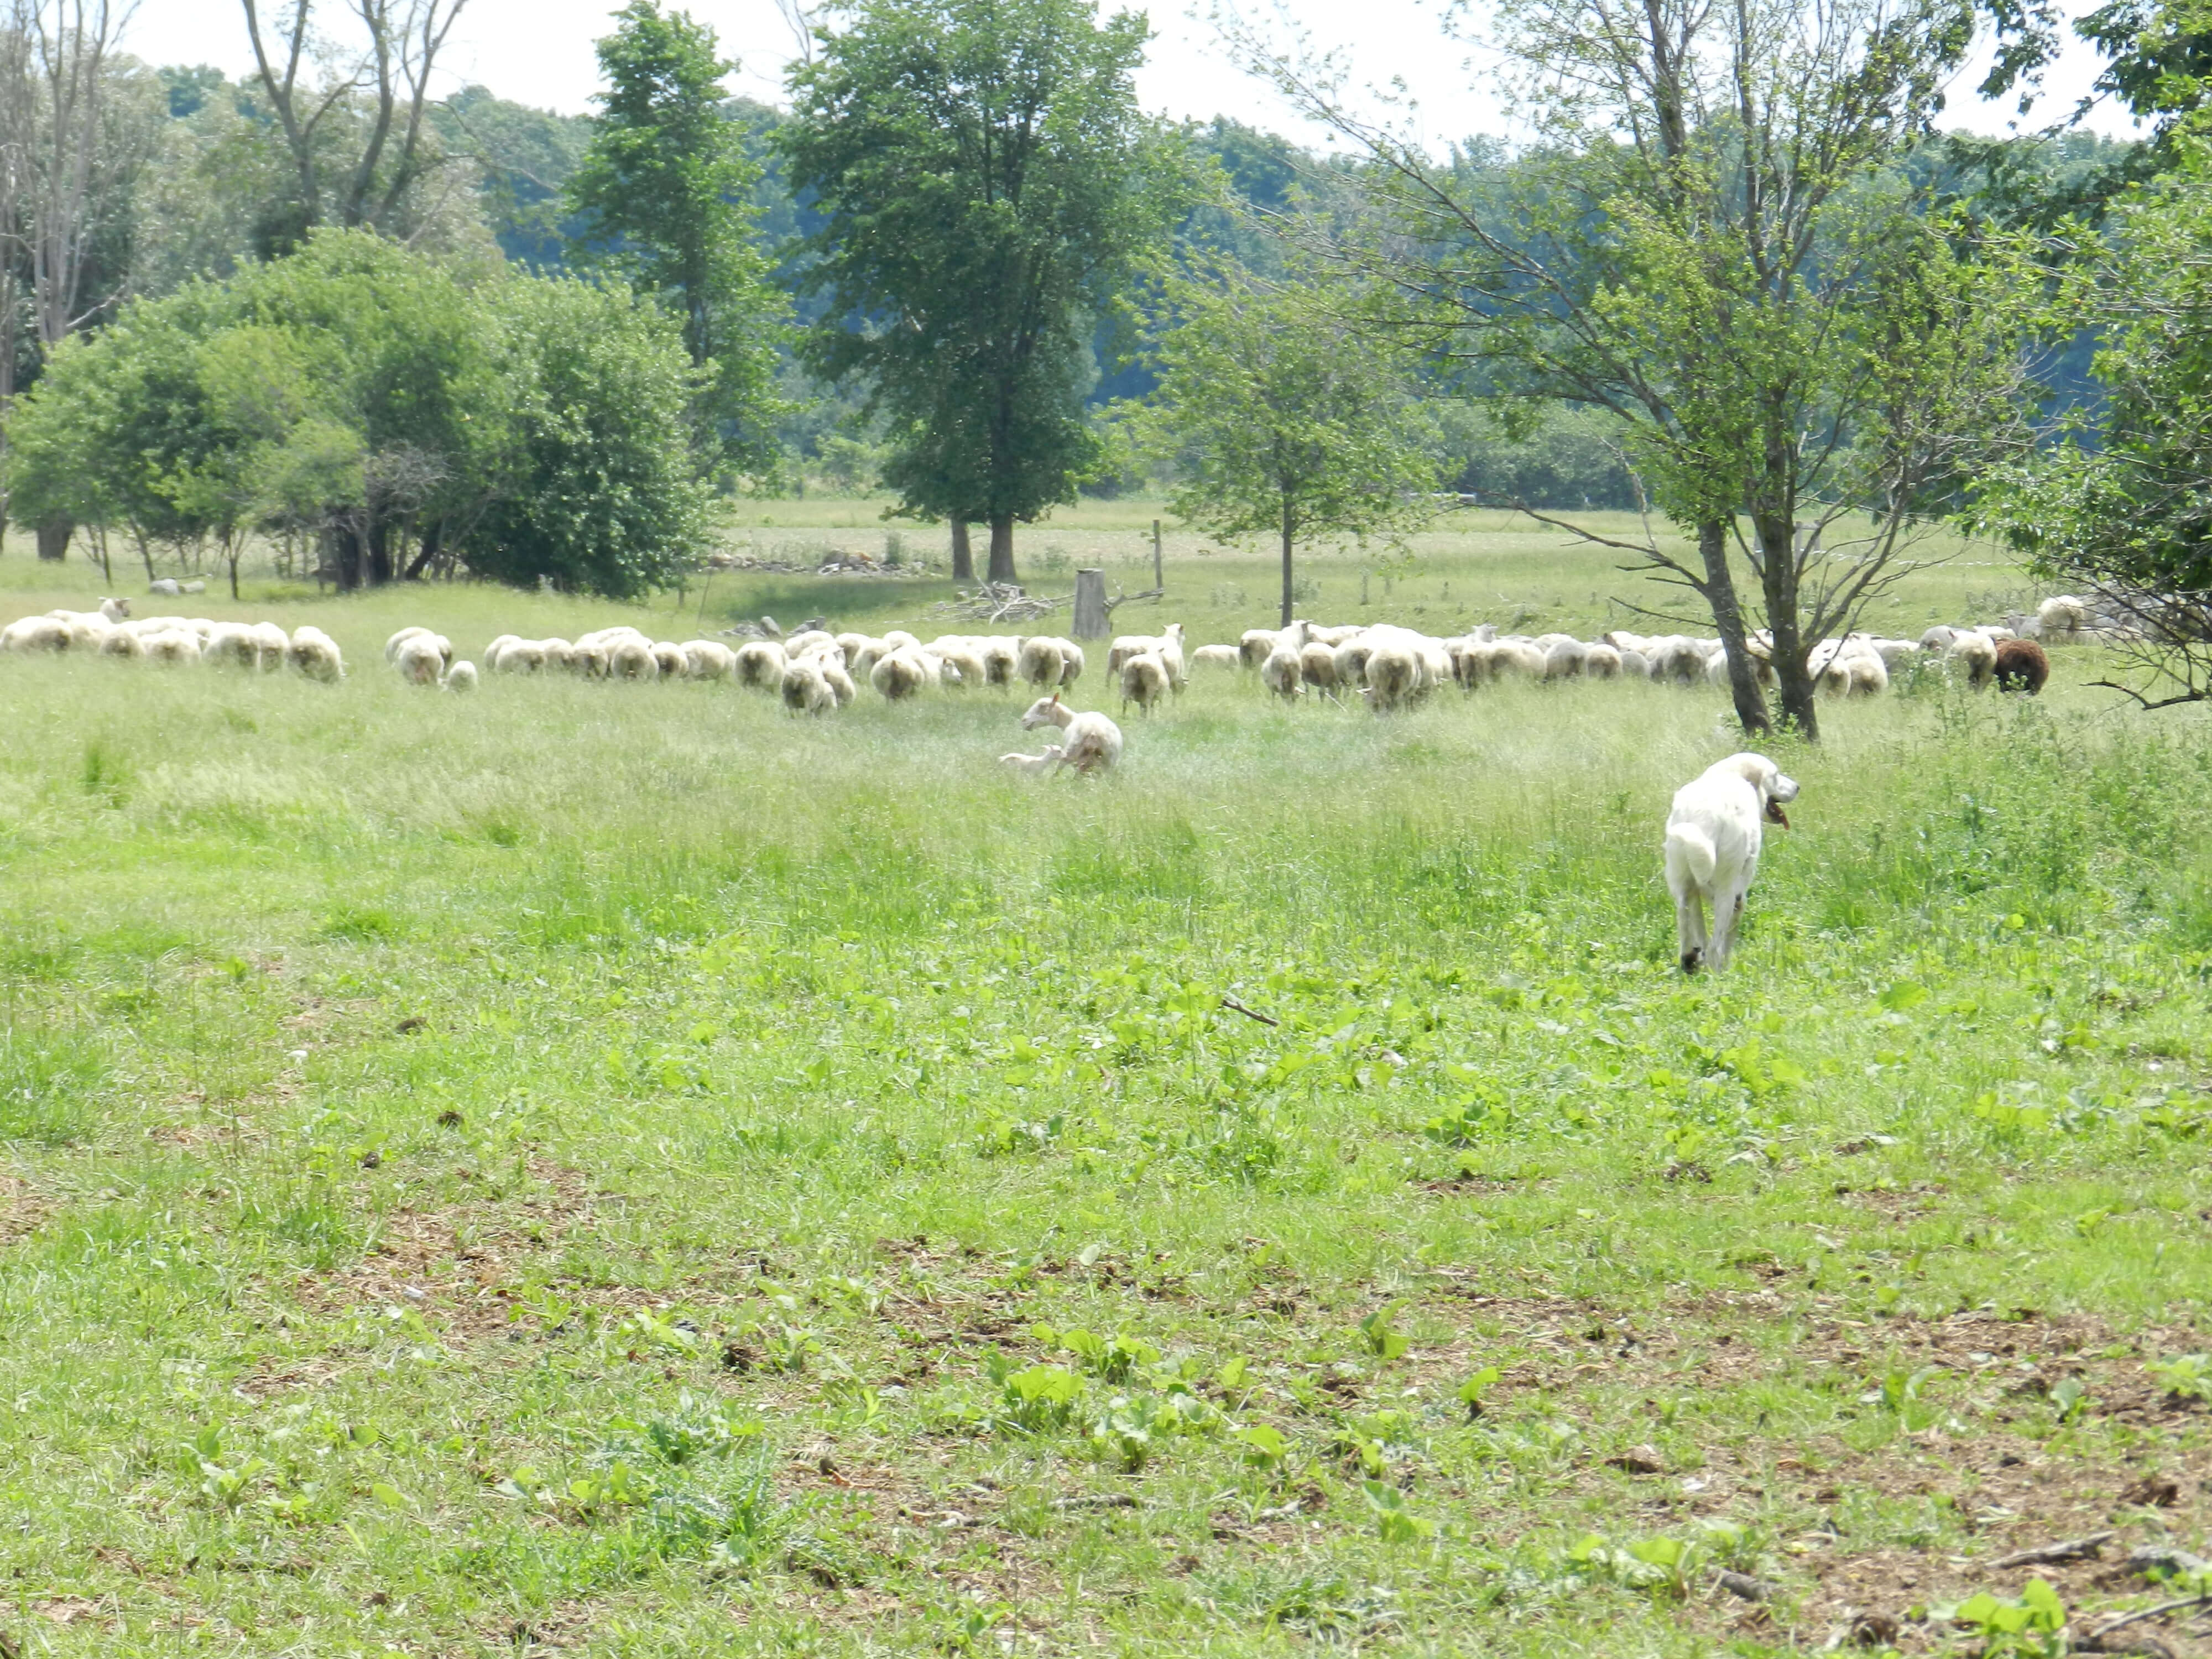 A livestock guardian dog watching a pastured sheep flock in Ontario.